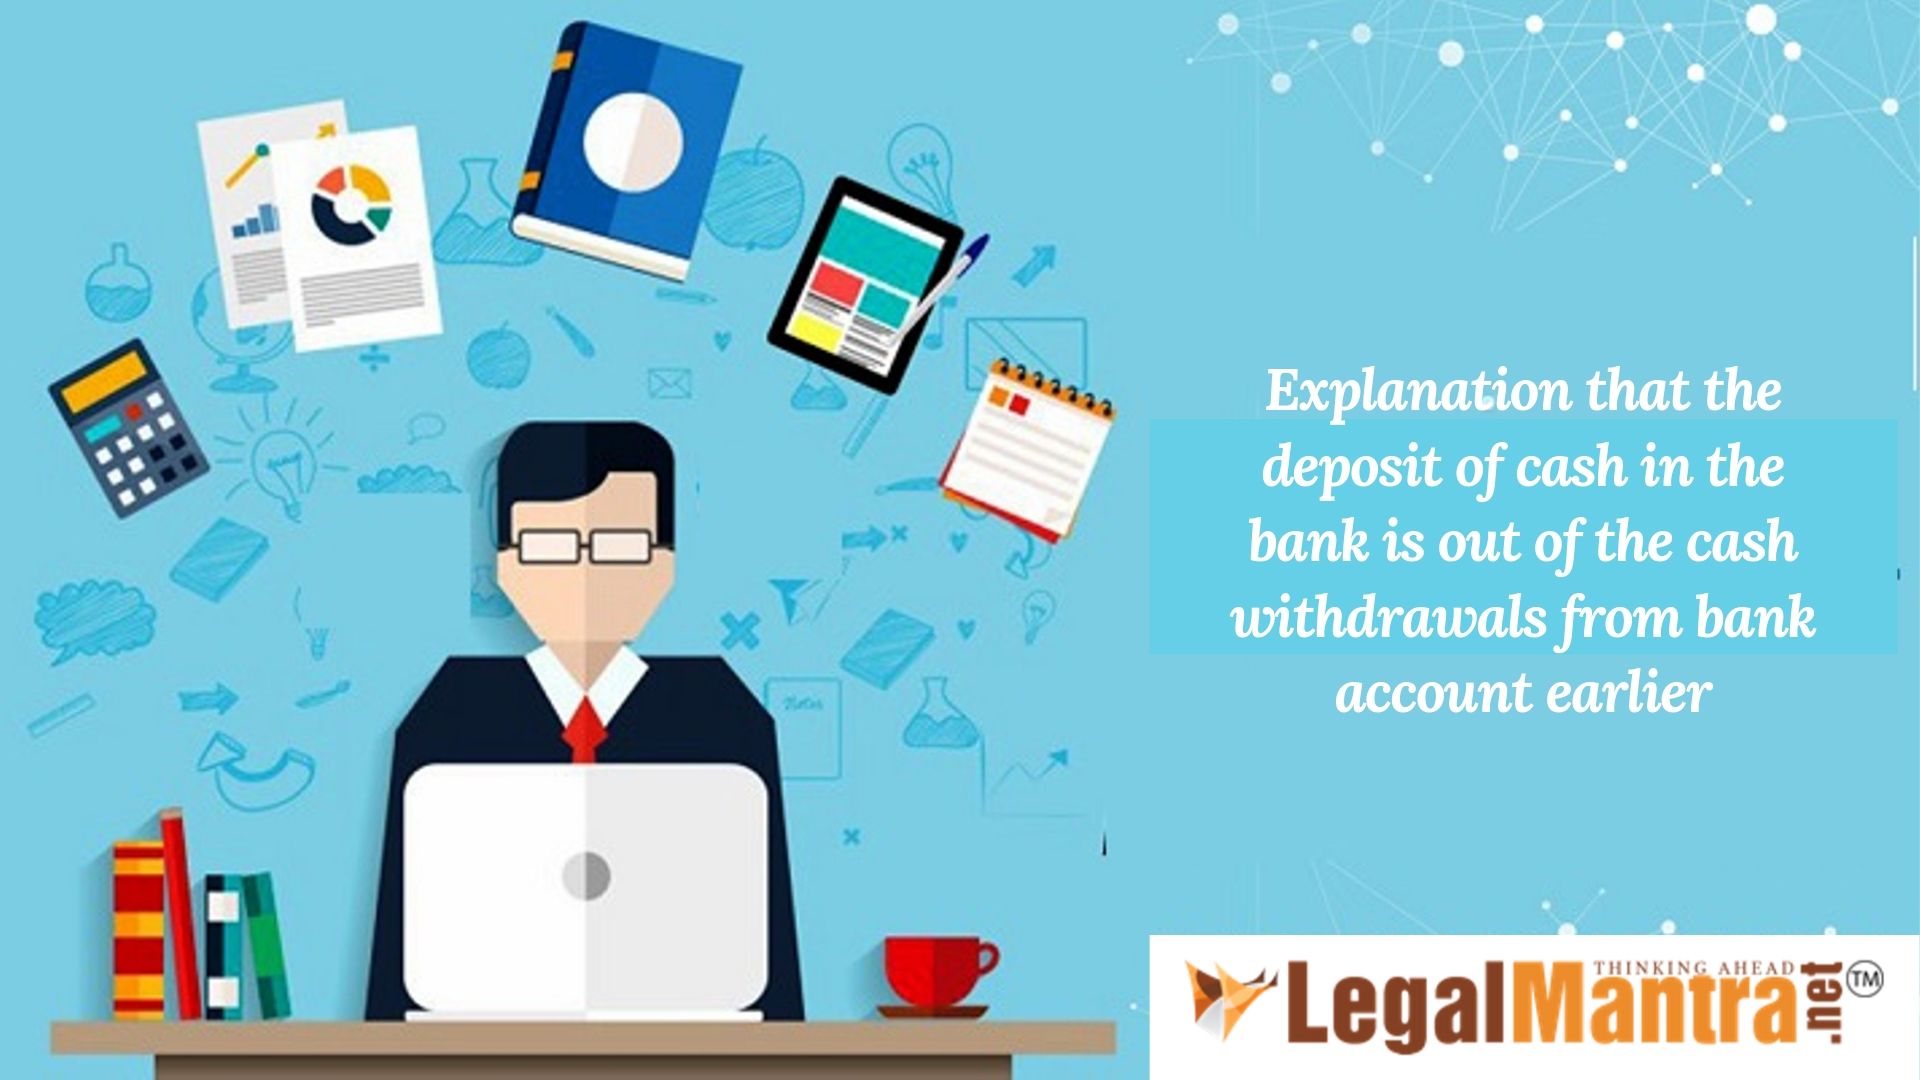 Explanation that the deposit of cash in the bank is out of the cash withdrawals from bank account earlier and validity of addition during income tax assessment